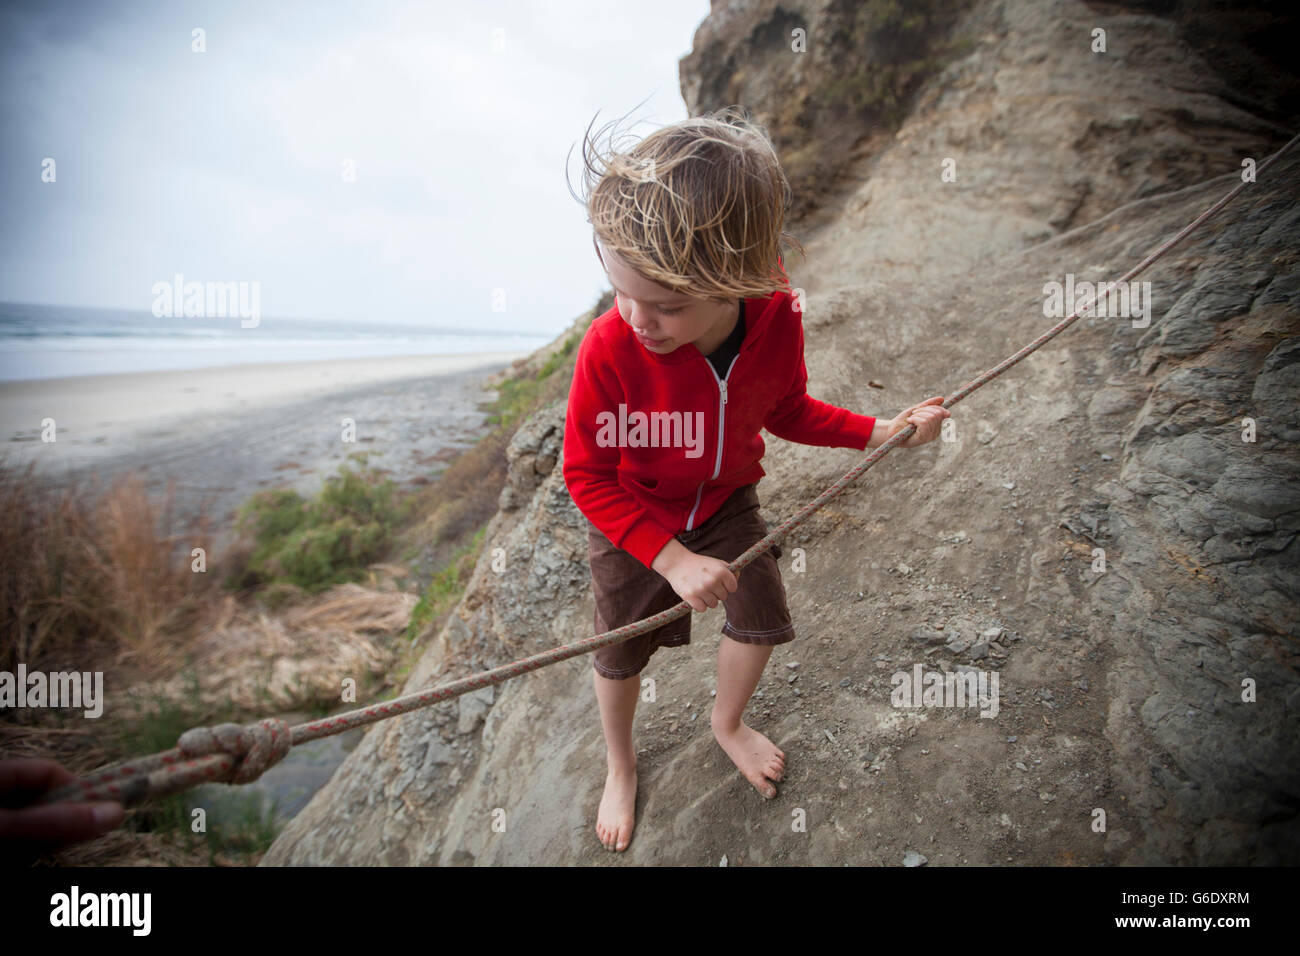 Boy age 5 using the rope to get down the wall to Blacks Beach, La Jolla, California. Stock Photo